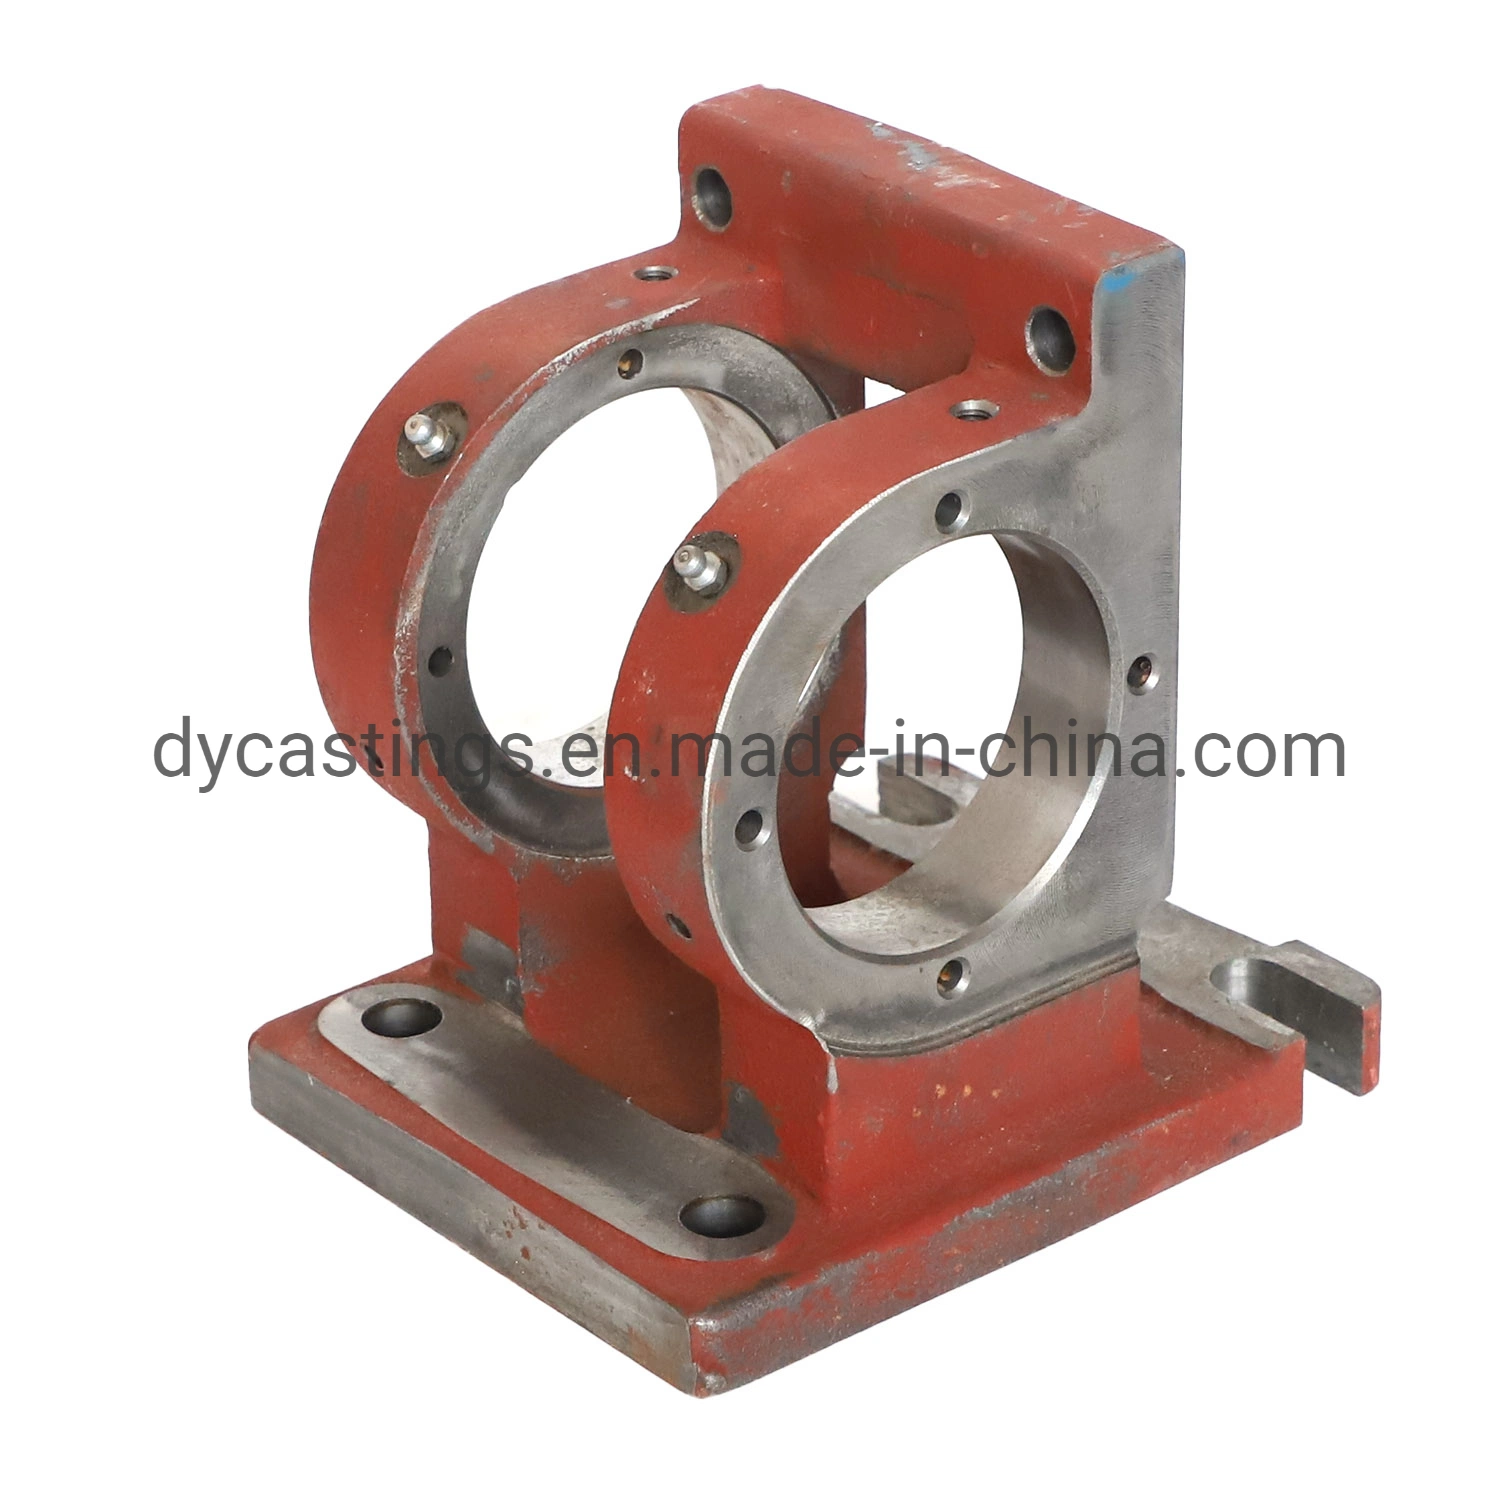 High Quality Cast Iron Tractor Bracket Support Agricultural Part